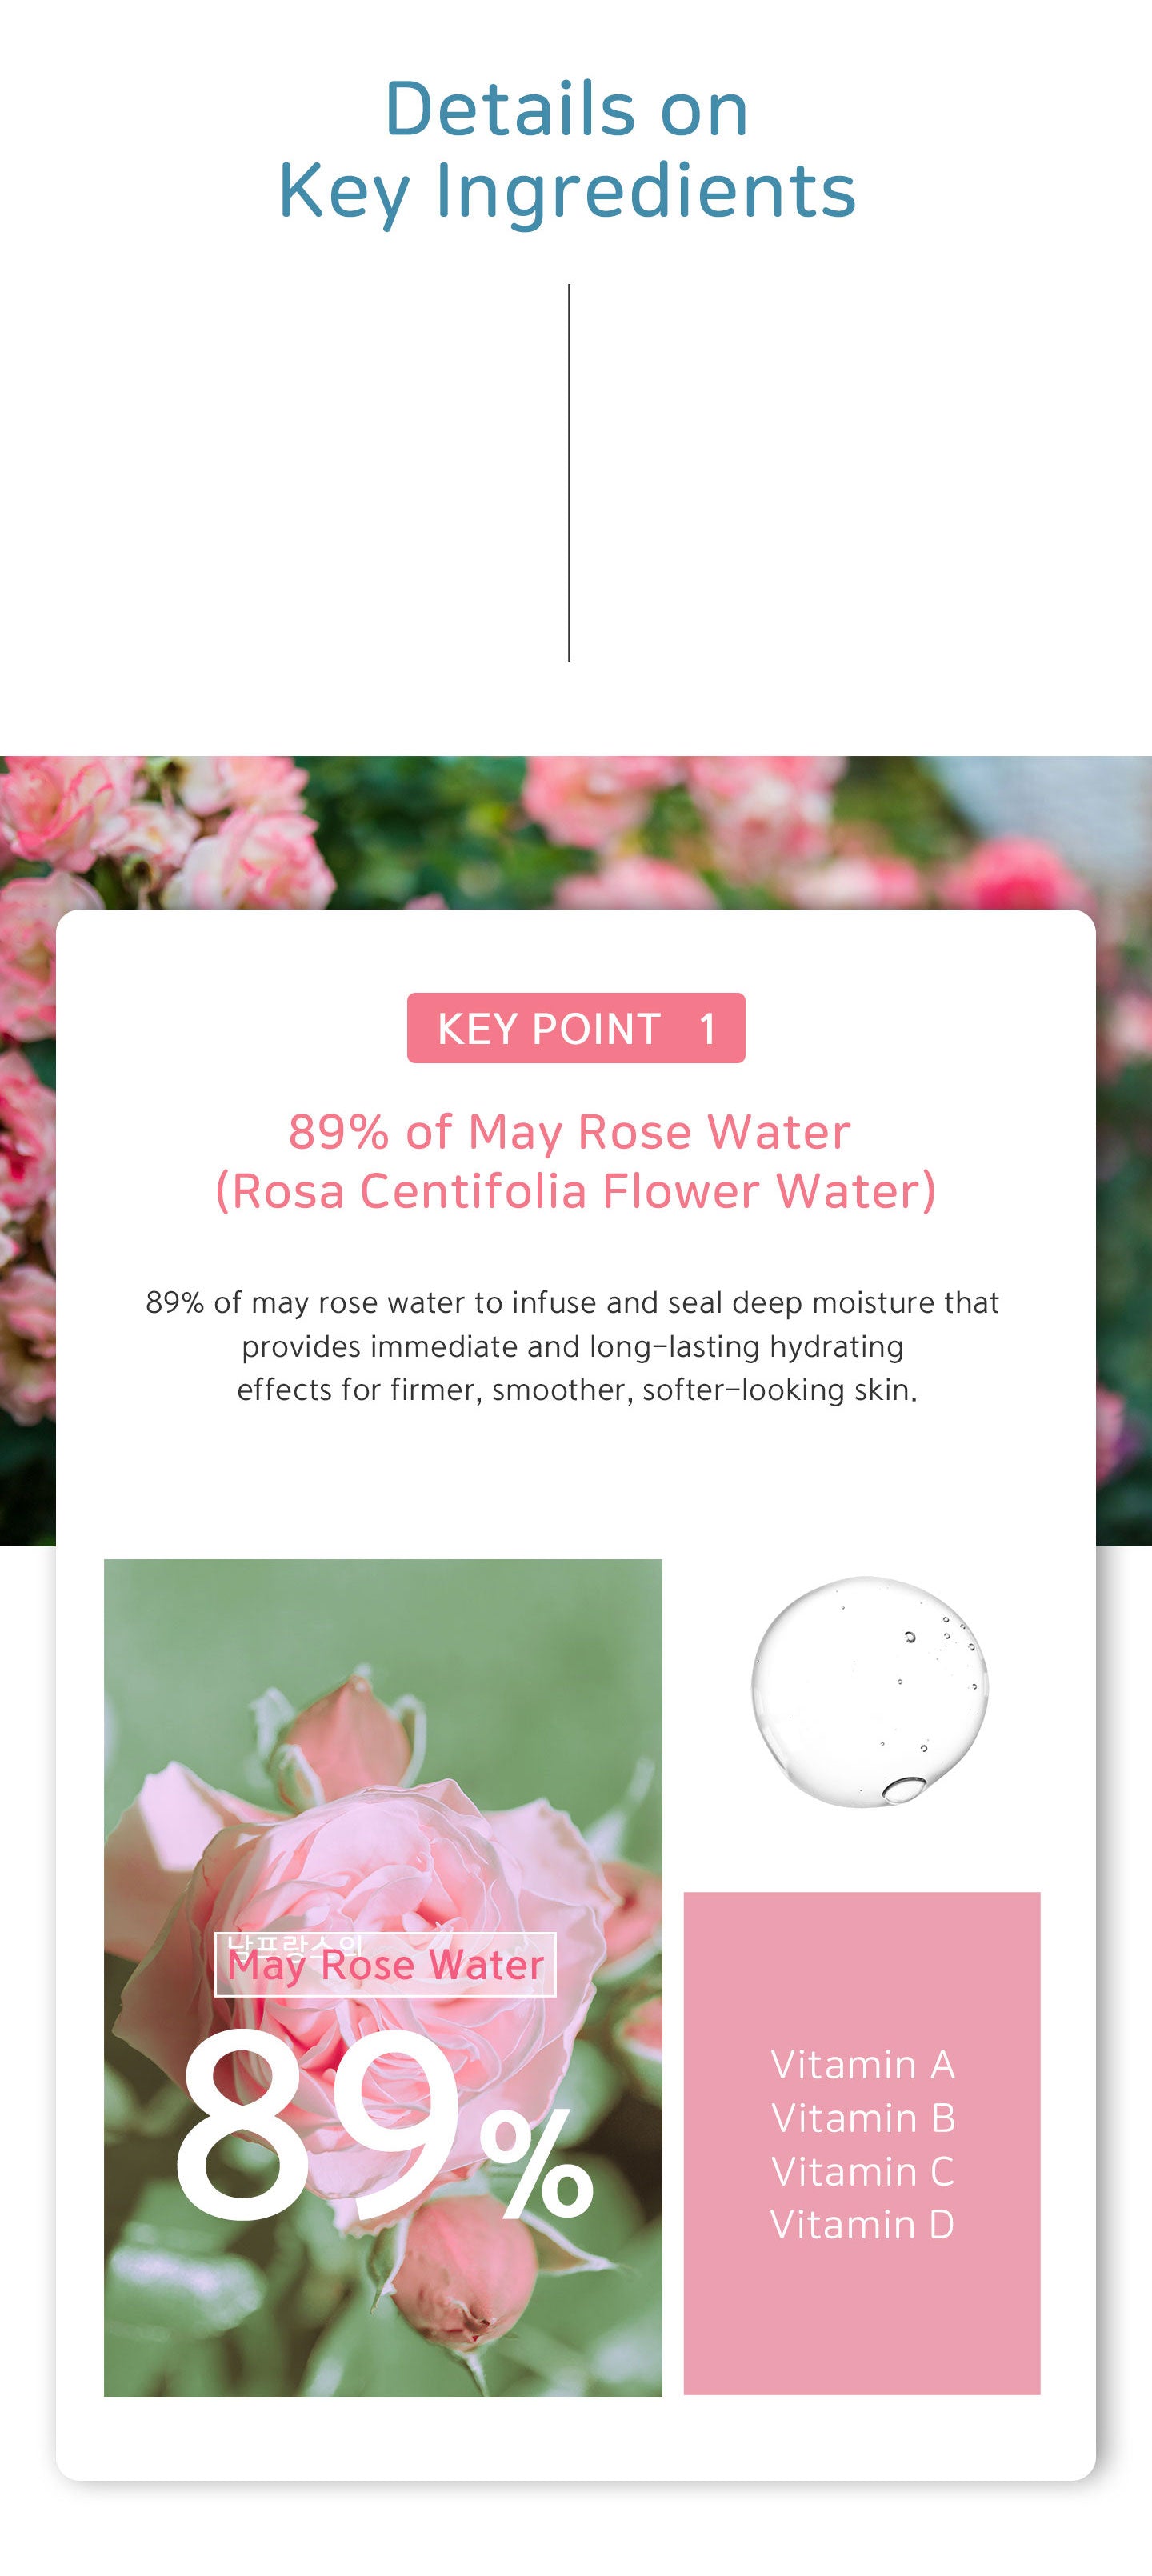 89% of may rose water to infuse and seal deep moisture that provides immediate and long-lasting hydrating effects for firmer, smoother, softer-looking skin. 